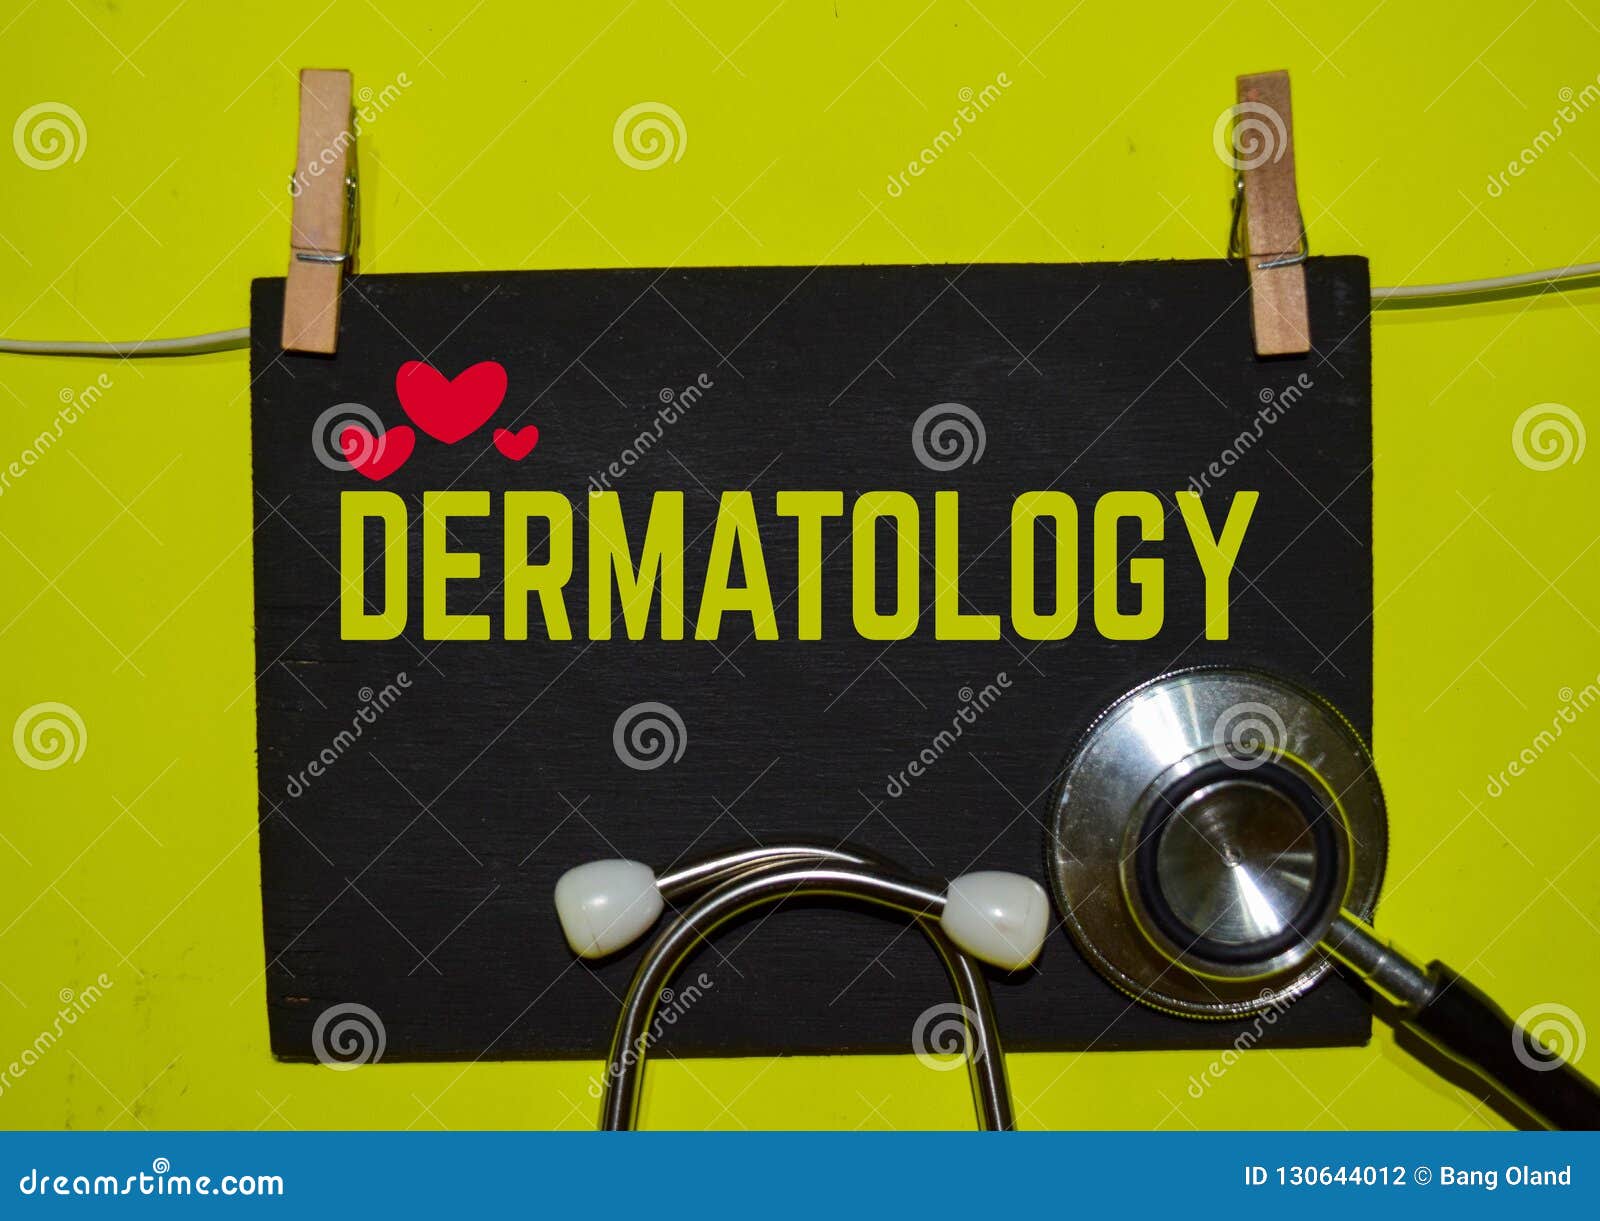 dermatology on top of yellow background